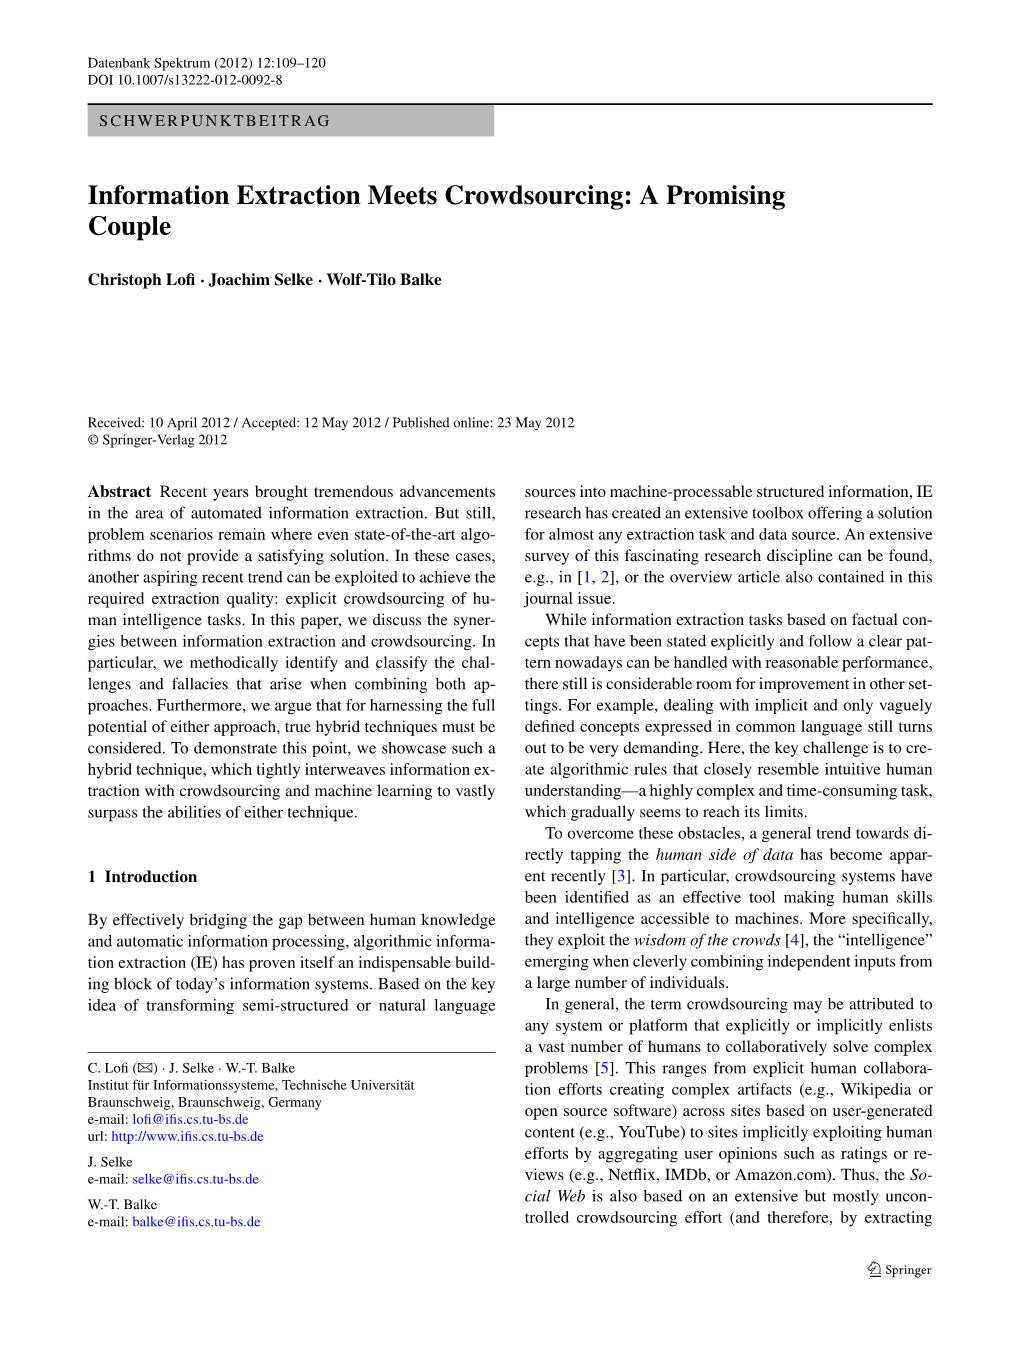 Information Extraction Meets Crowdsourcing: a Promising Couple